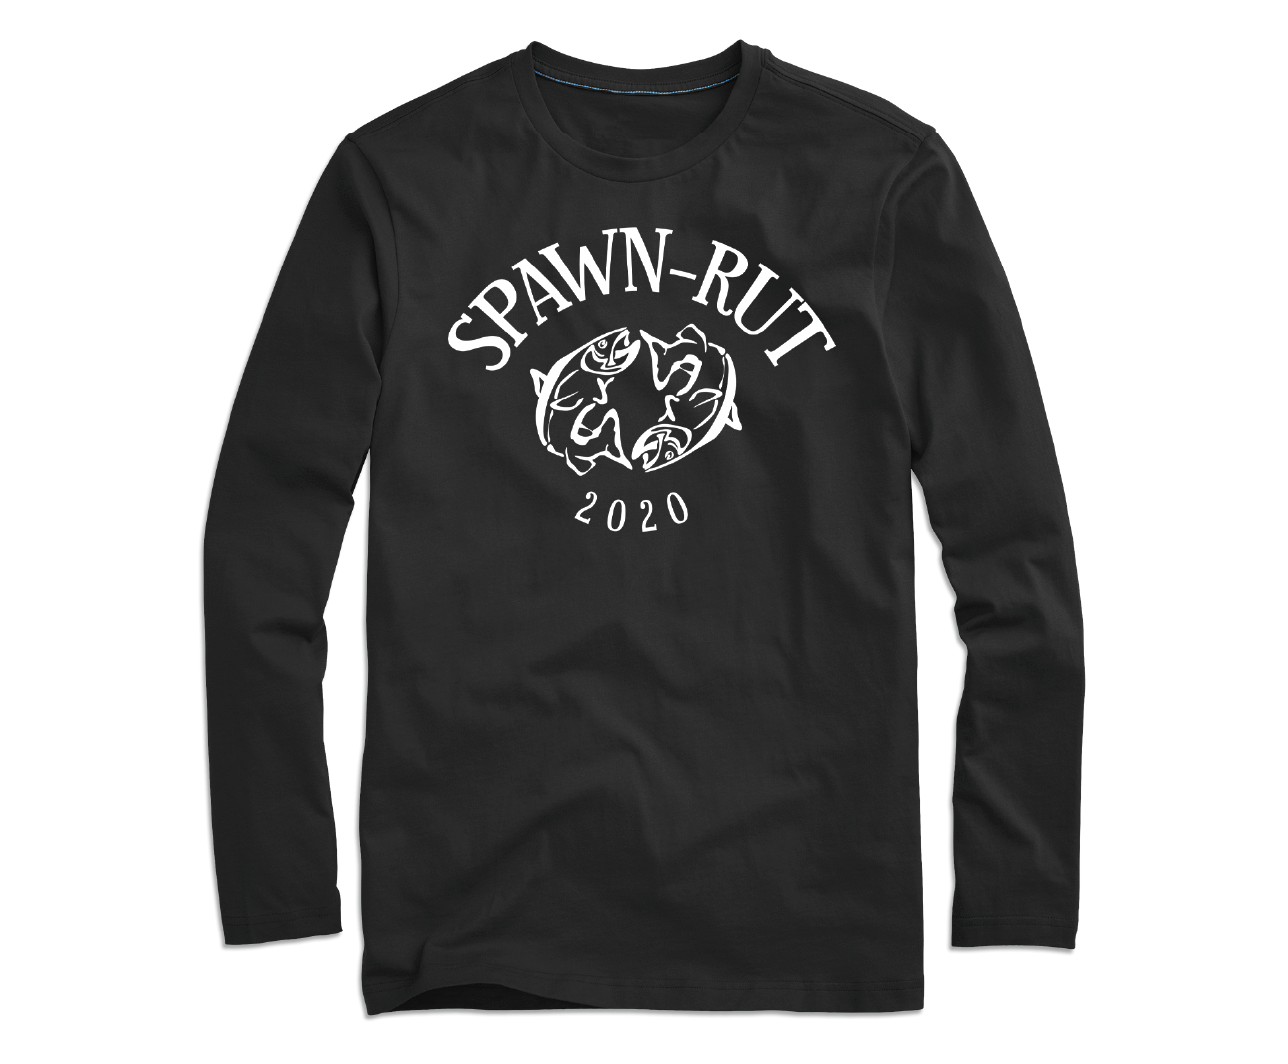 Outdoors Clothing Brand for Fishing, Hunting, Traveling & Hiking. Spawn Rut  Shop